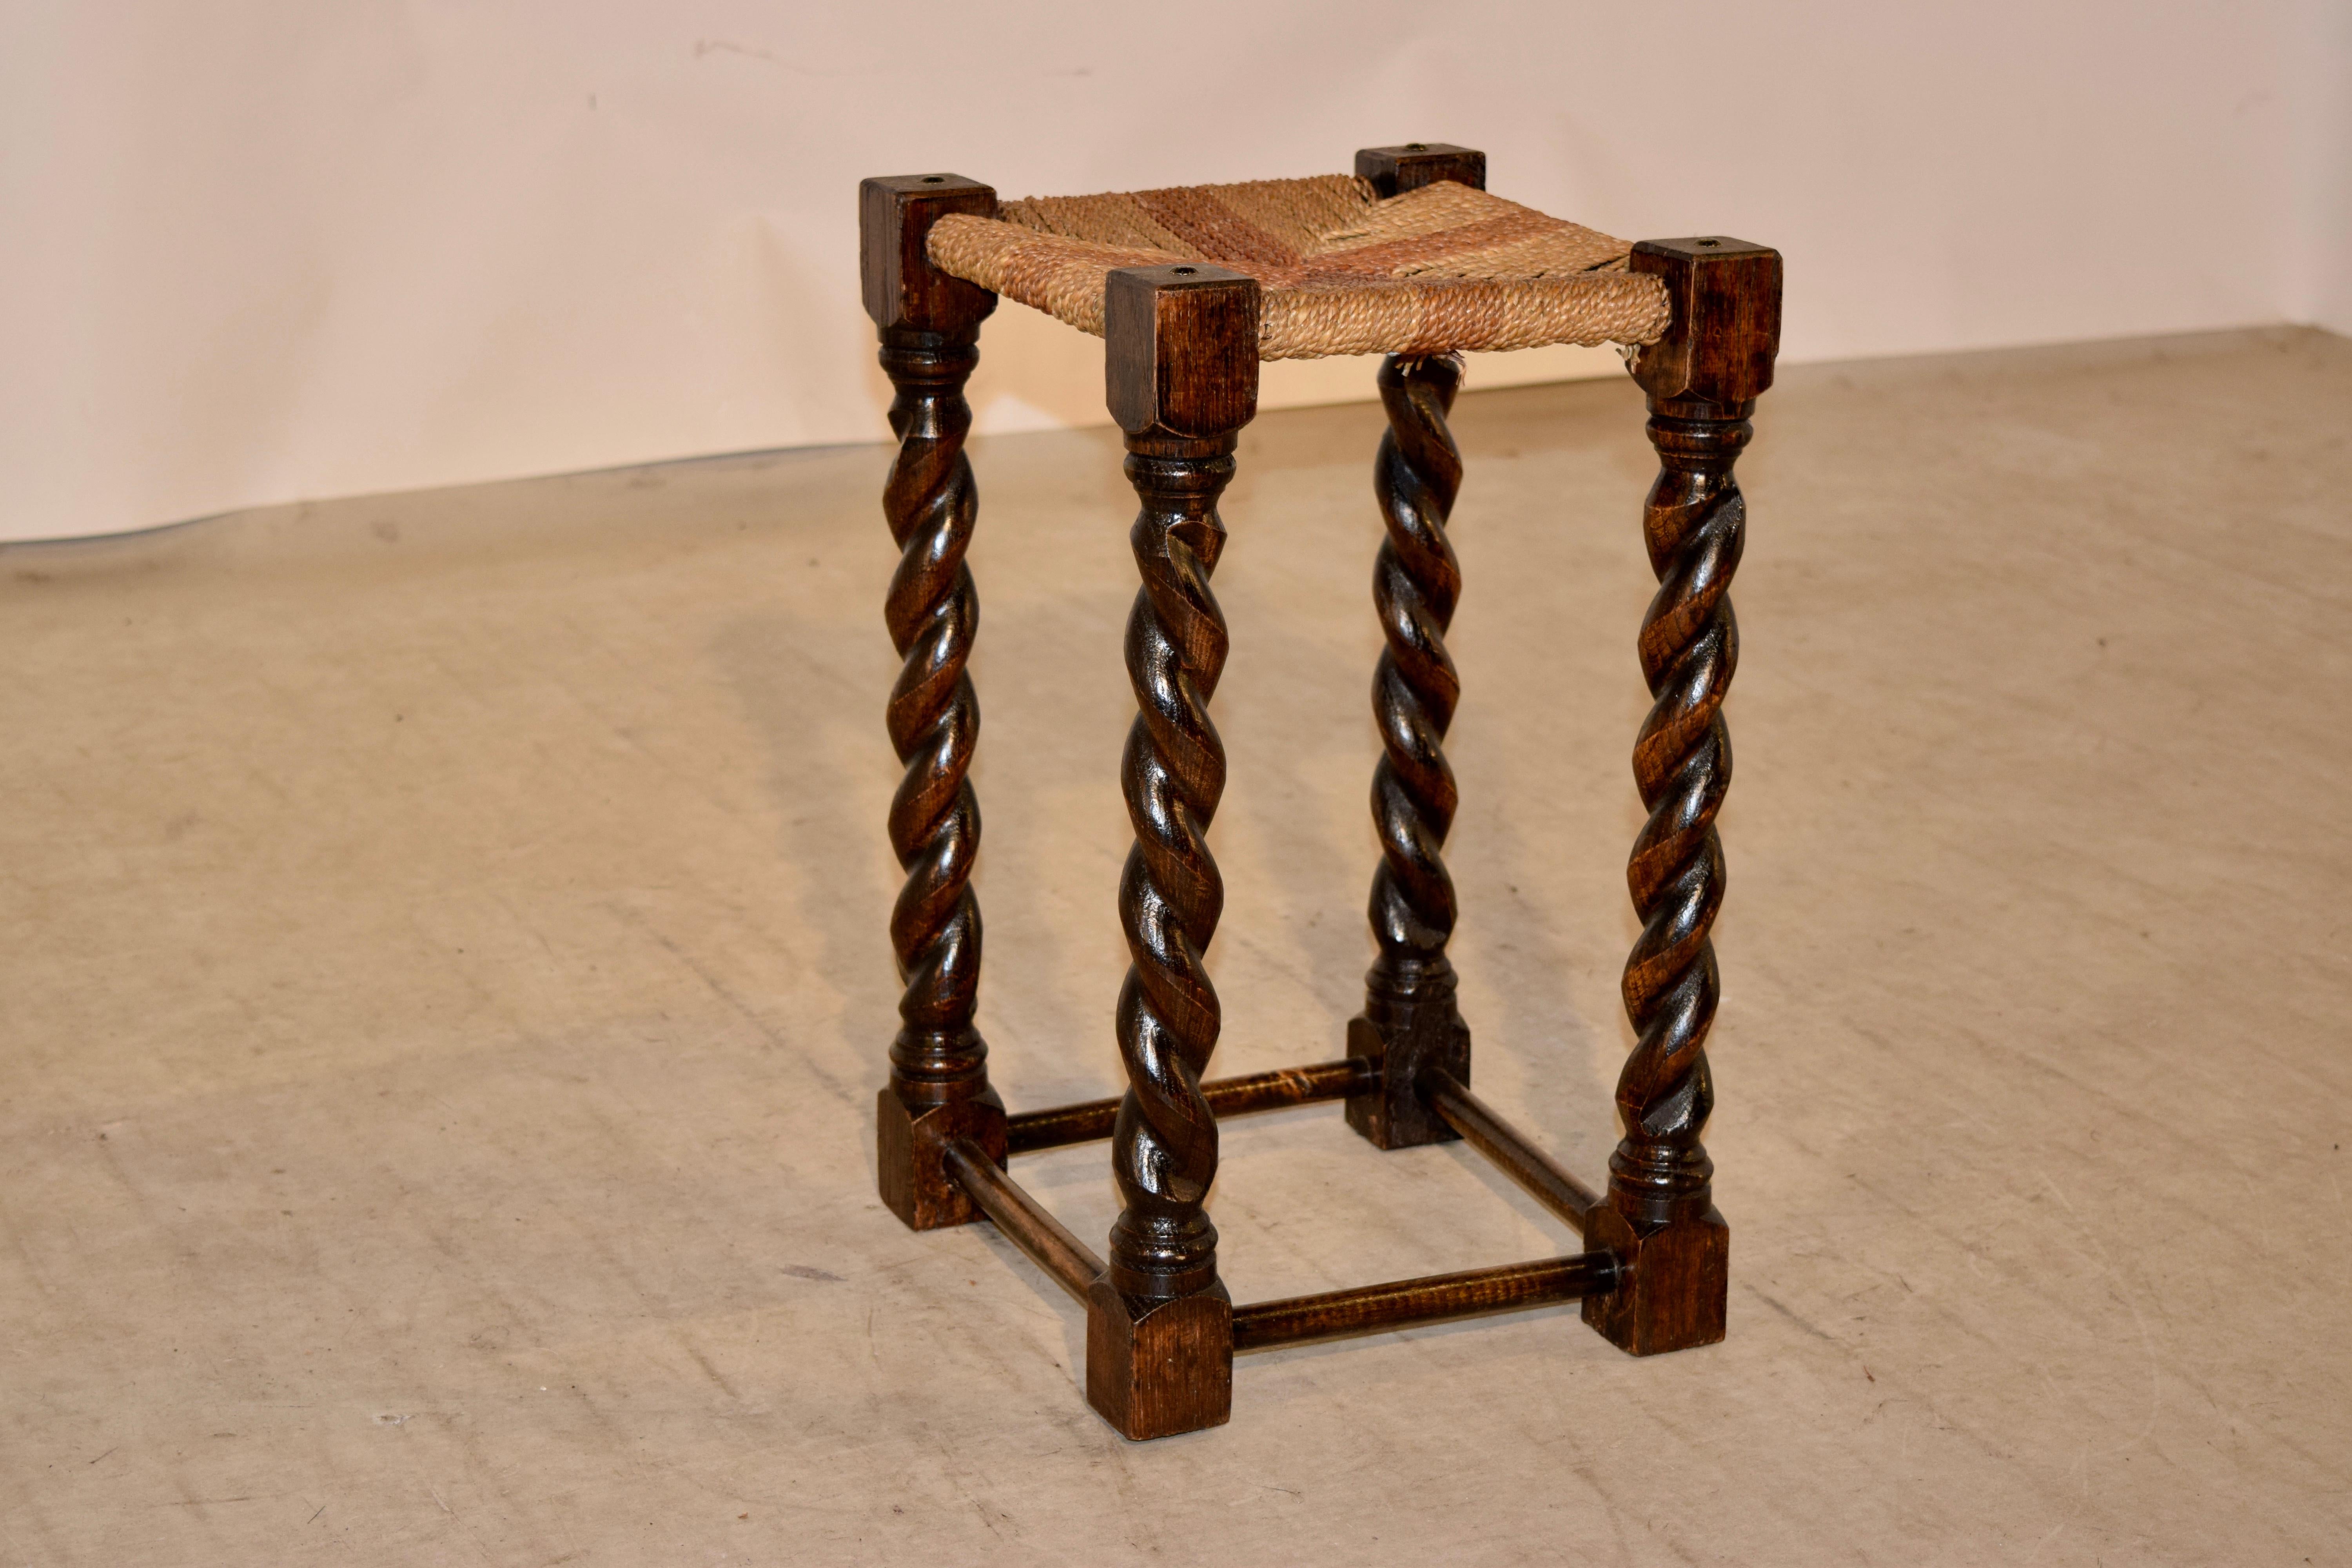 19th century oak stool from England with a hand woven rush top and hand turned barley twist legs joined by simple stretchers. Great height.